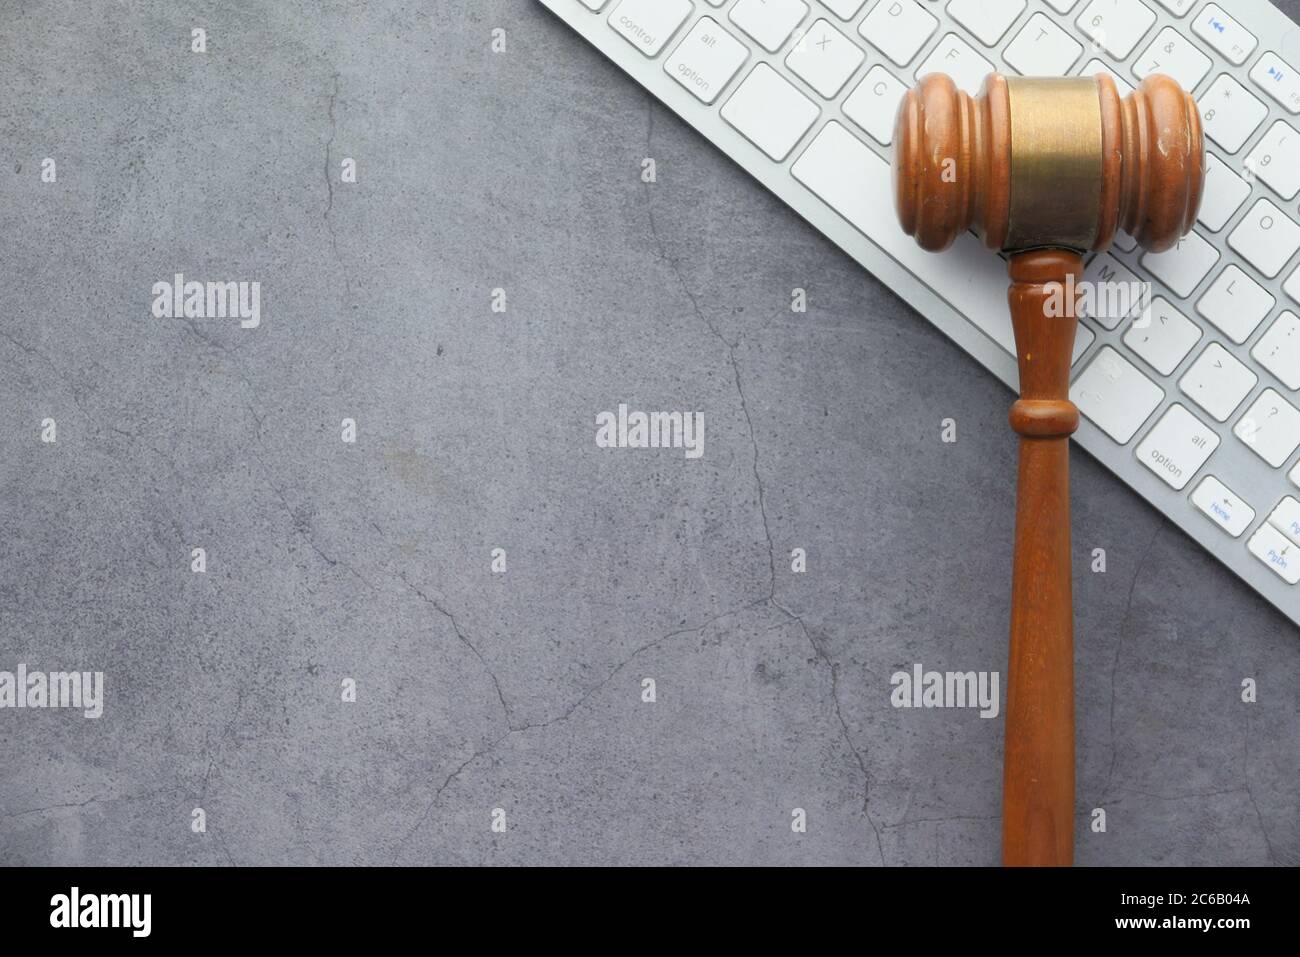 gavel on keyboard on black background with copy space  Stock Photo